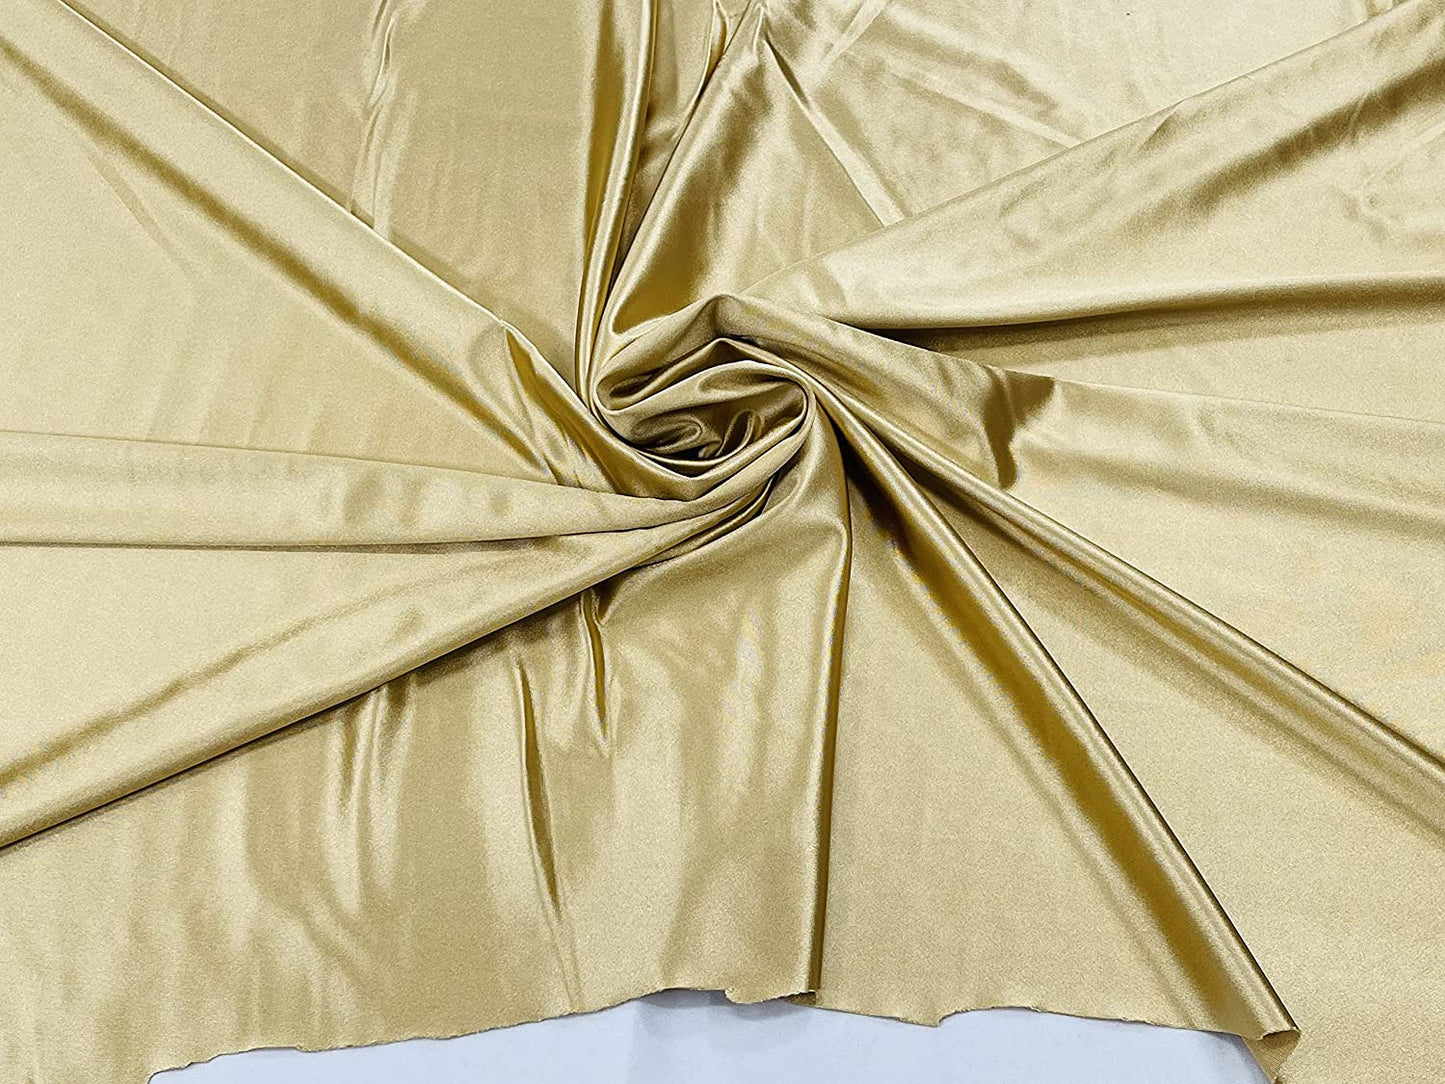 Deluxe Shiny Polyester Spandex Stretch Fabric (1 Yard, Light Gold)